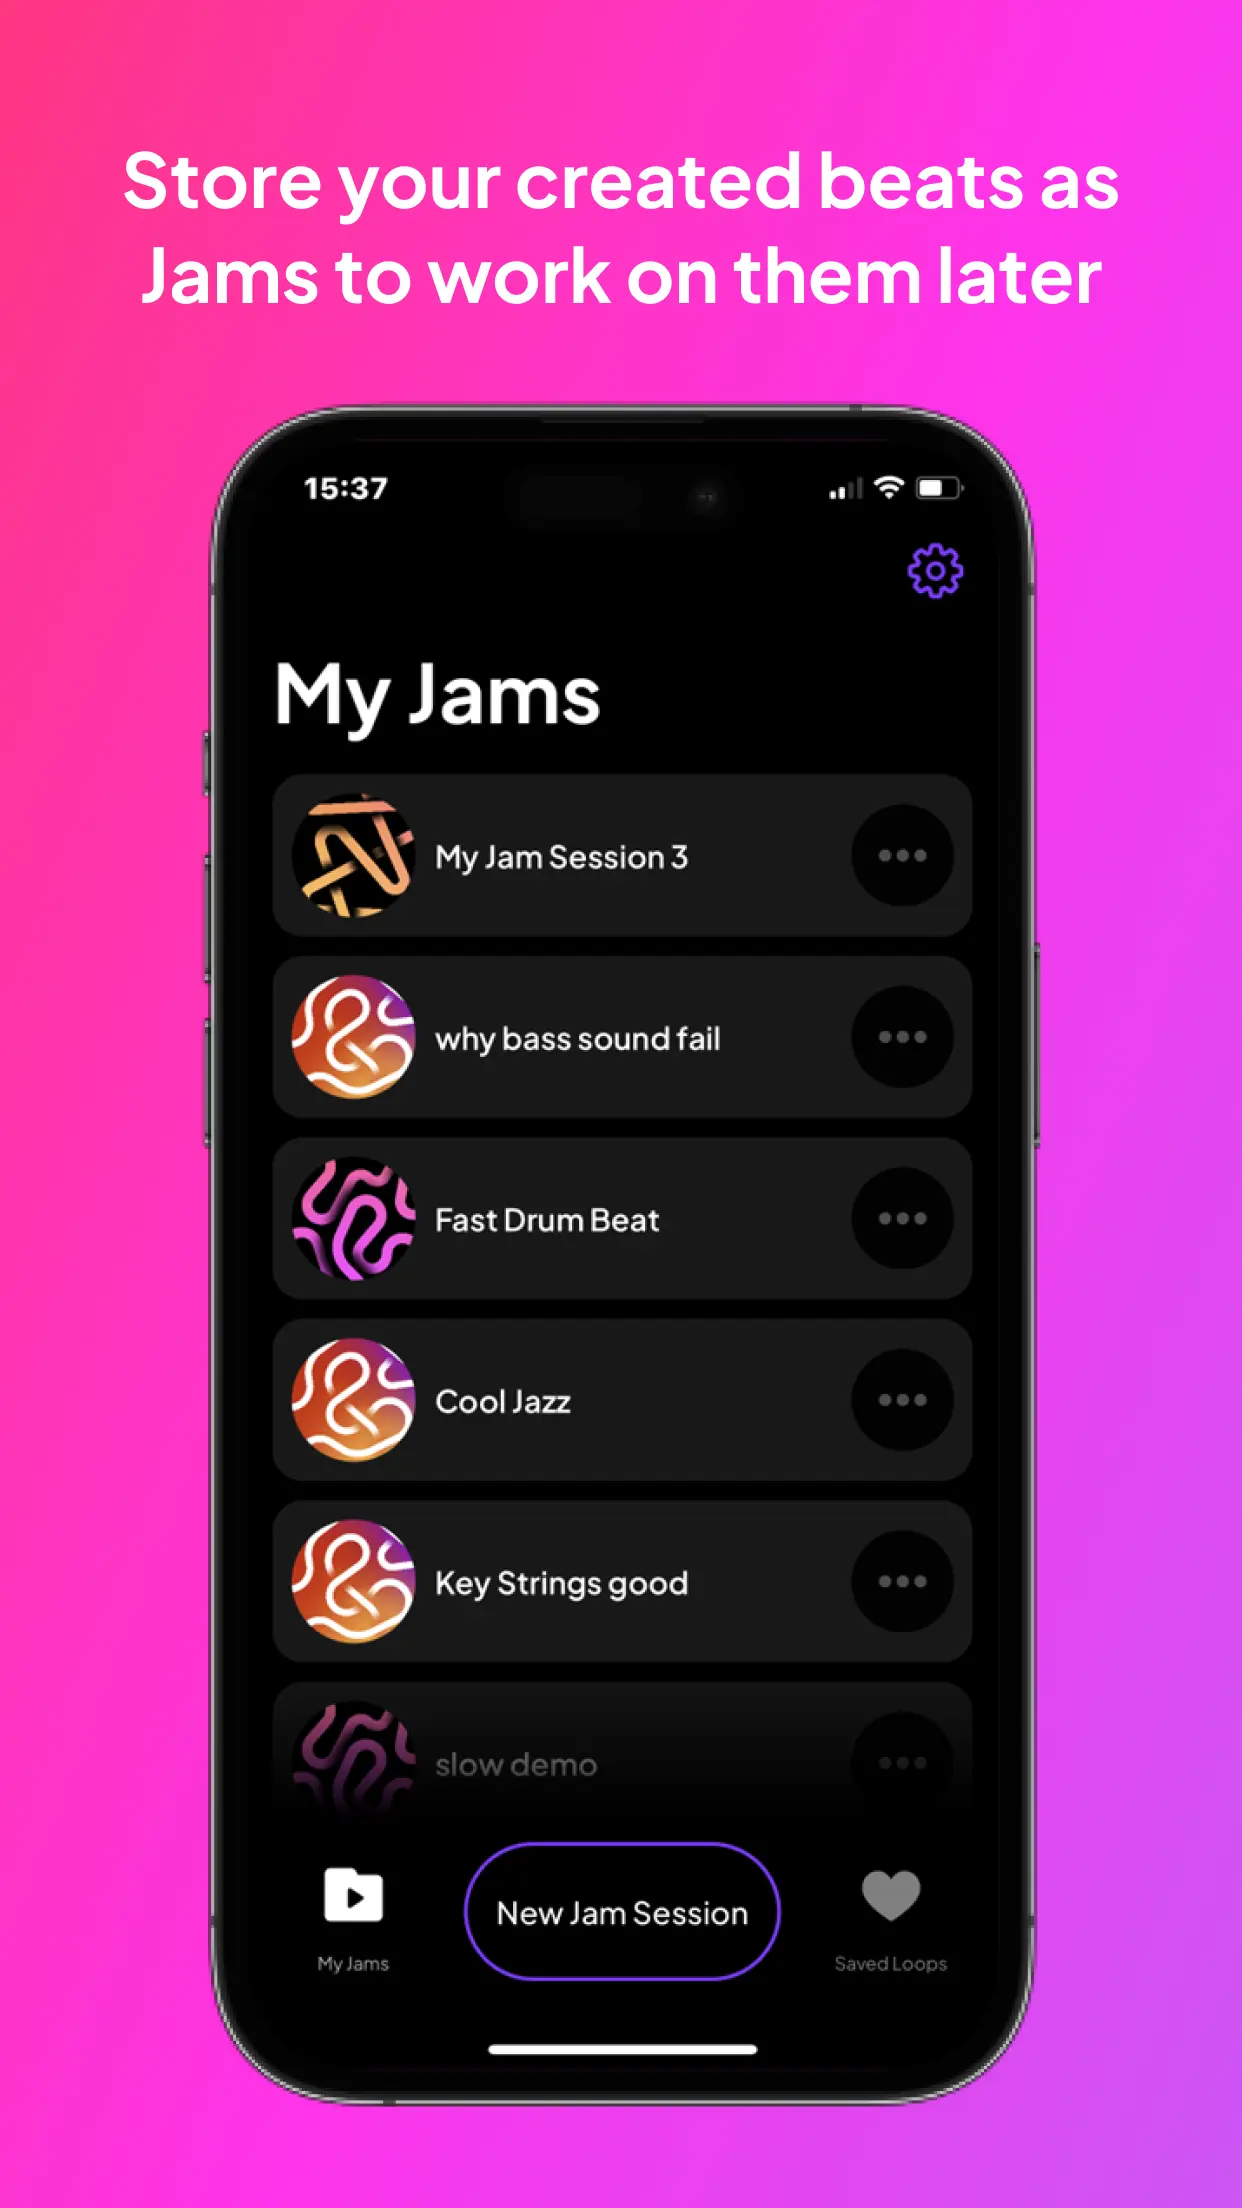 Jamahook mobile app on iPhone frame: 'Store your created beats as Jams and work on them later.'